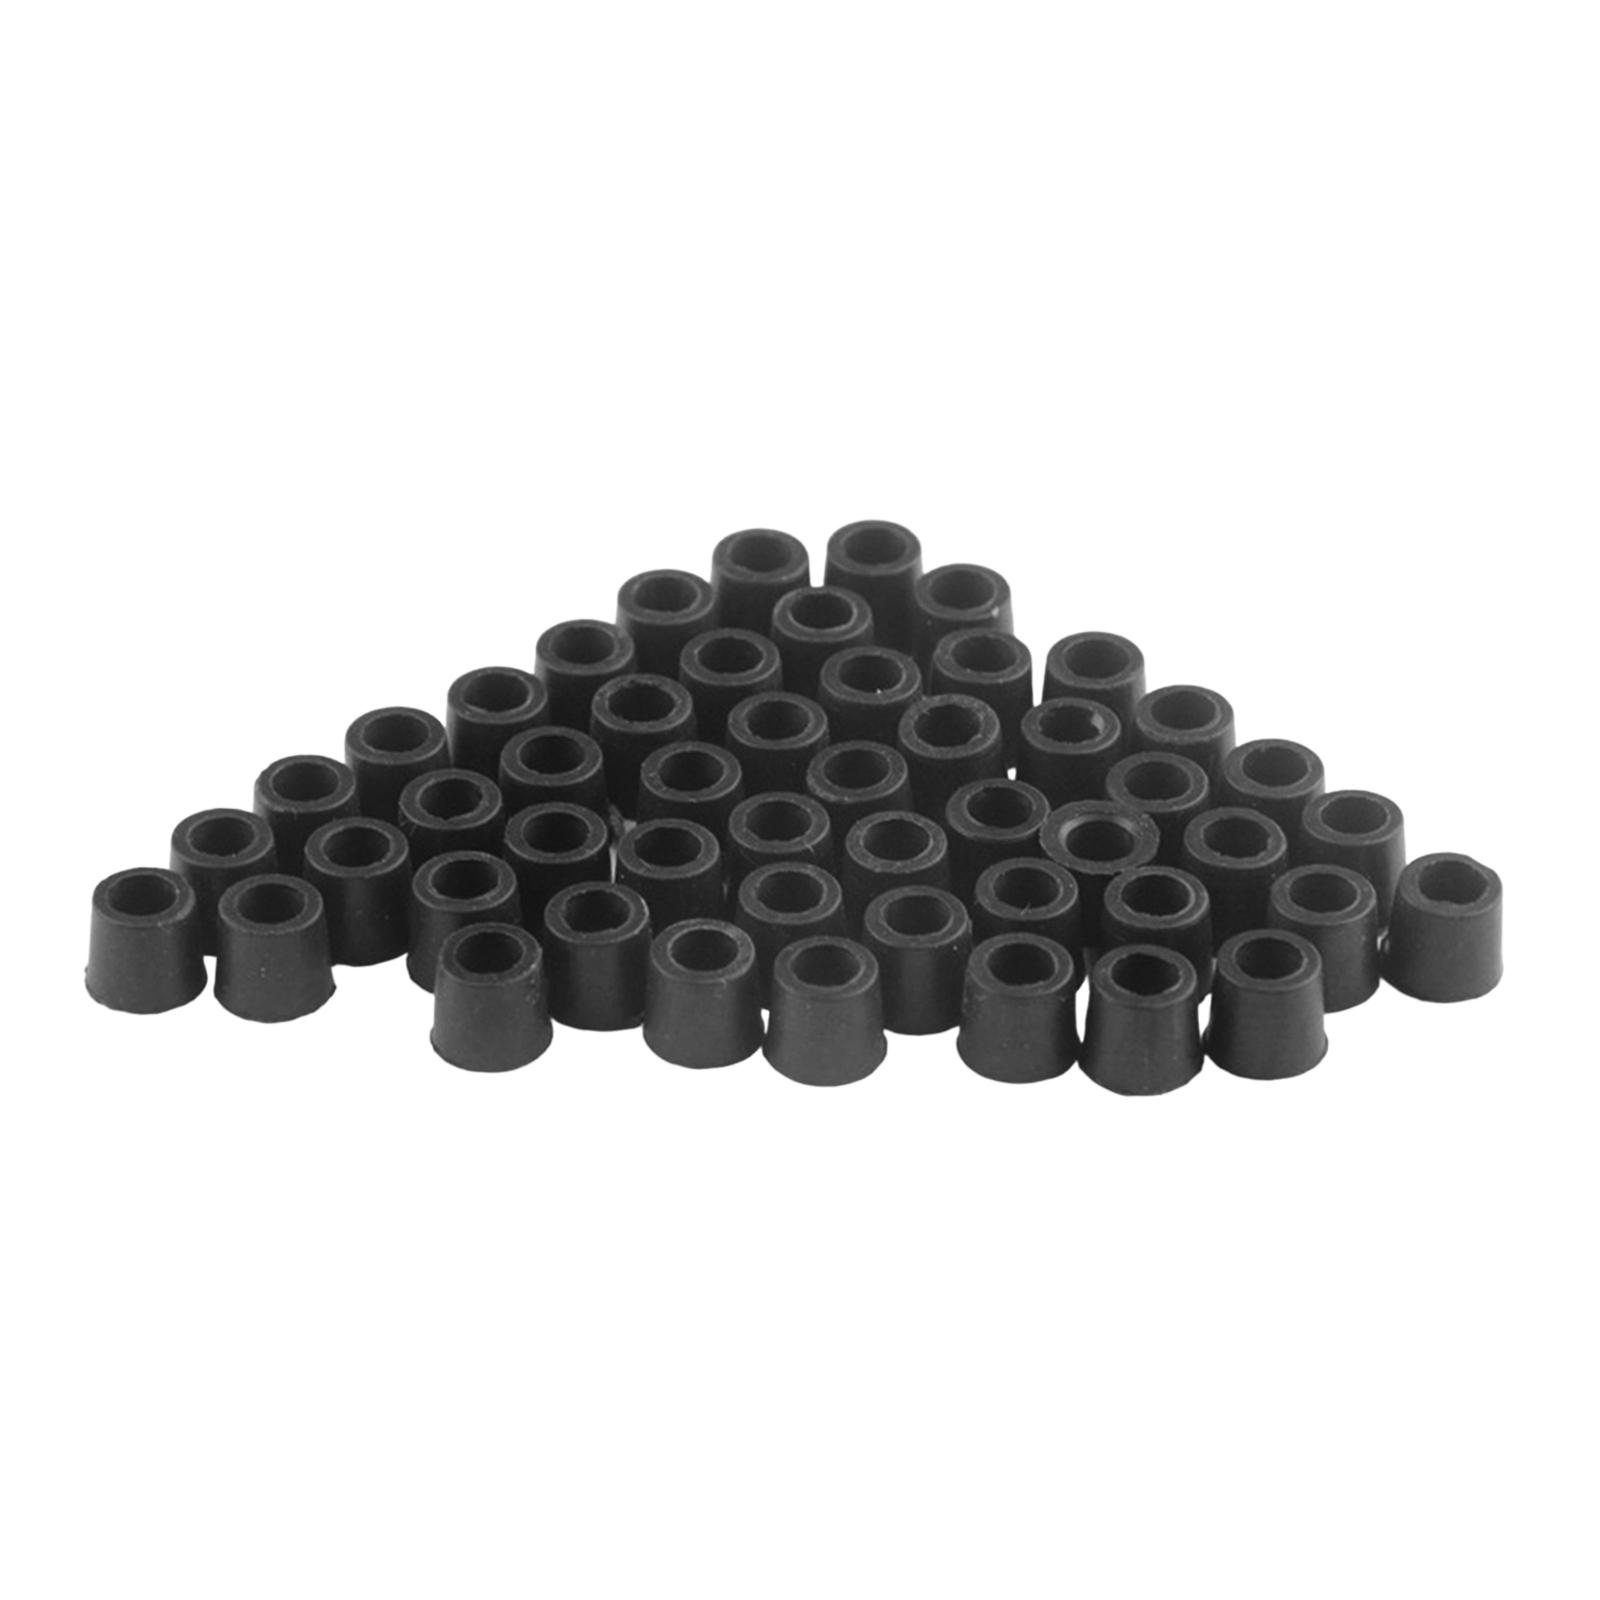 50 Pieces Valve O Ring Gasket Washer Repair Tool Manifold Repair Set Devices Black